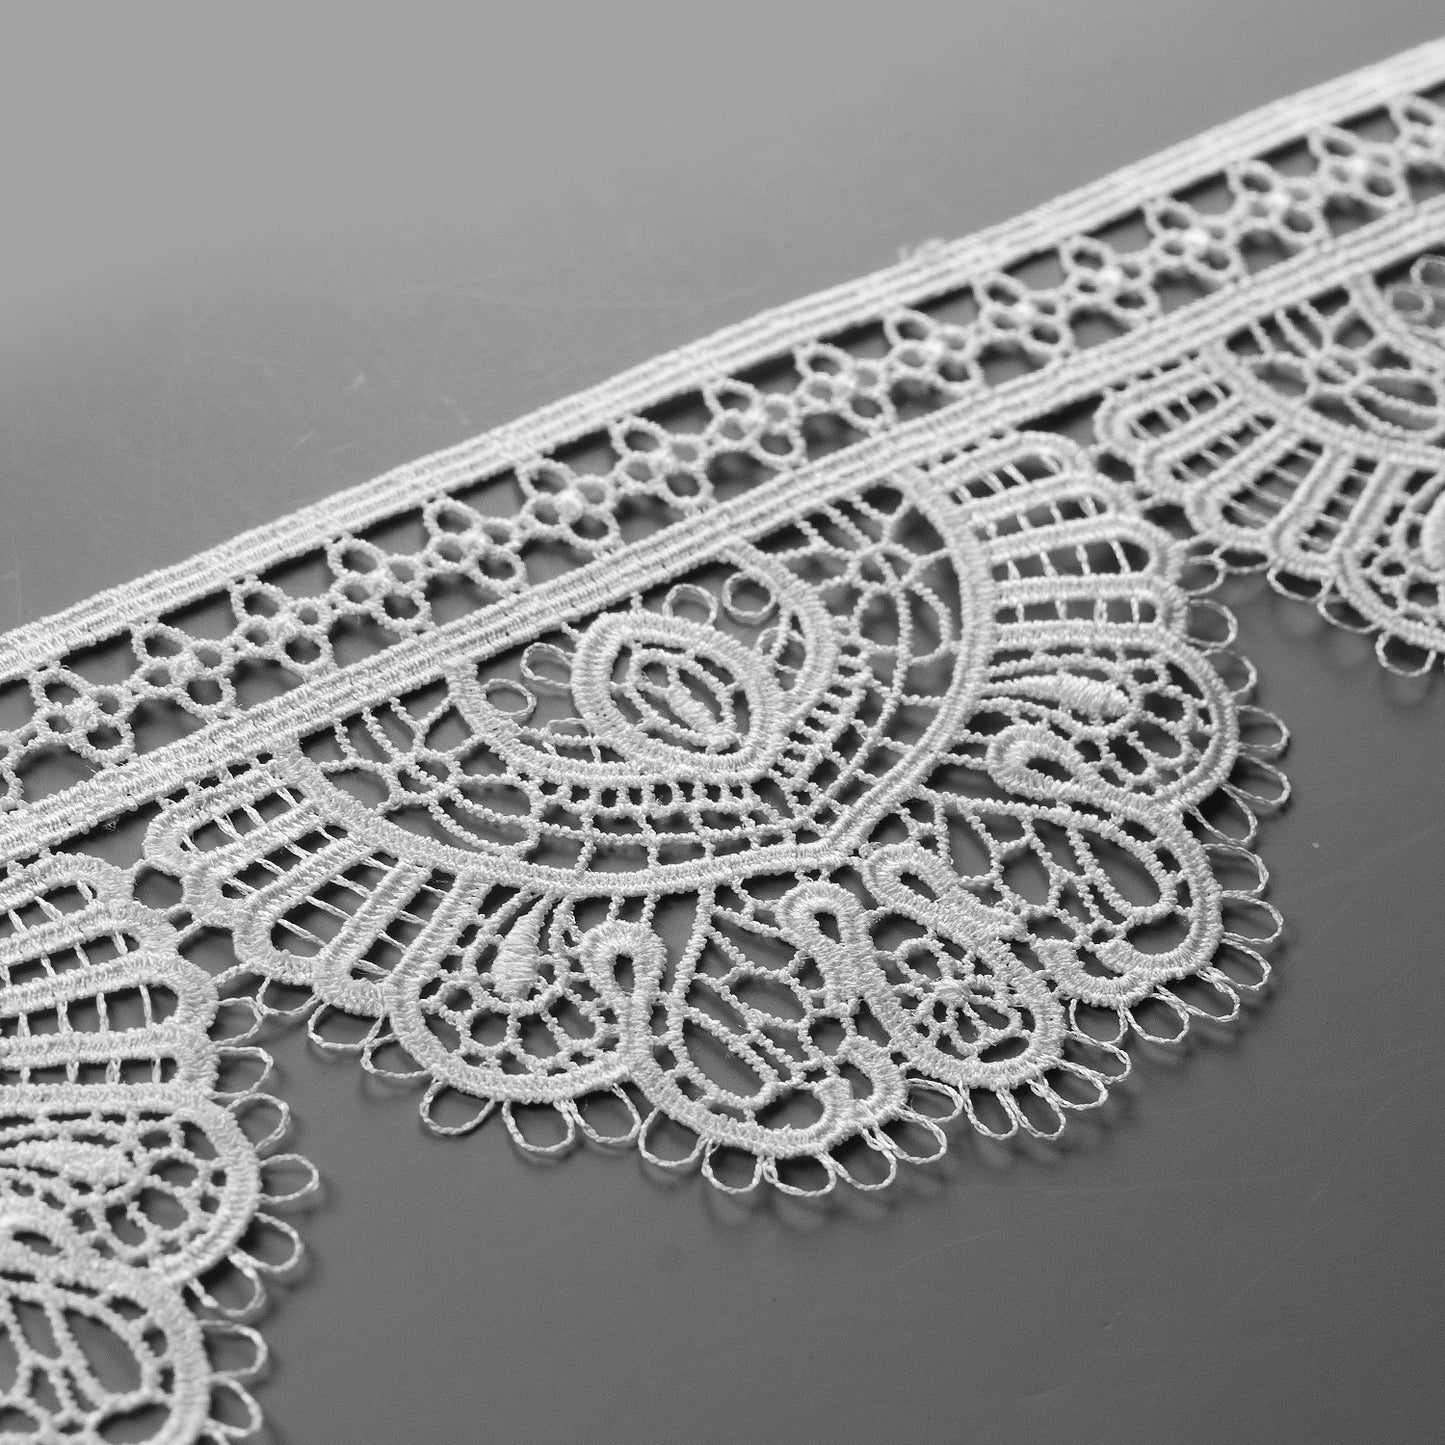 Agnella Embroidered Designer Venice Lace Trim (Sold by the Yard)